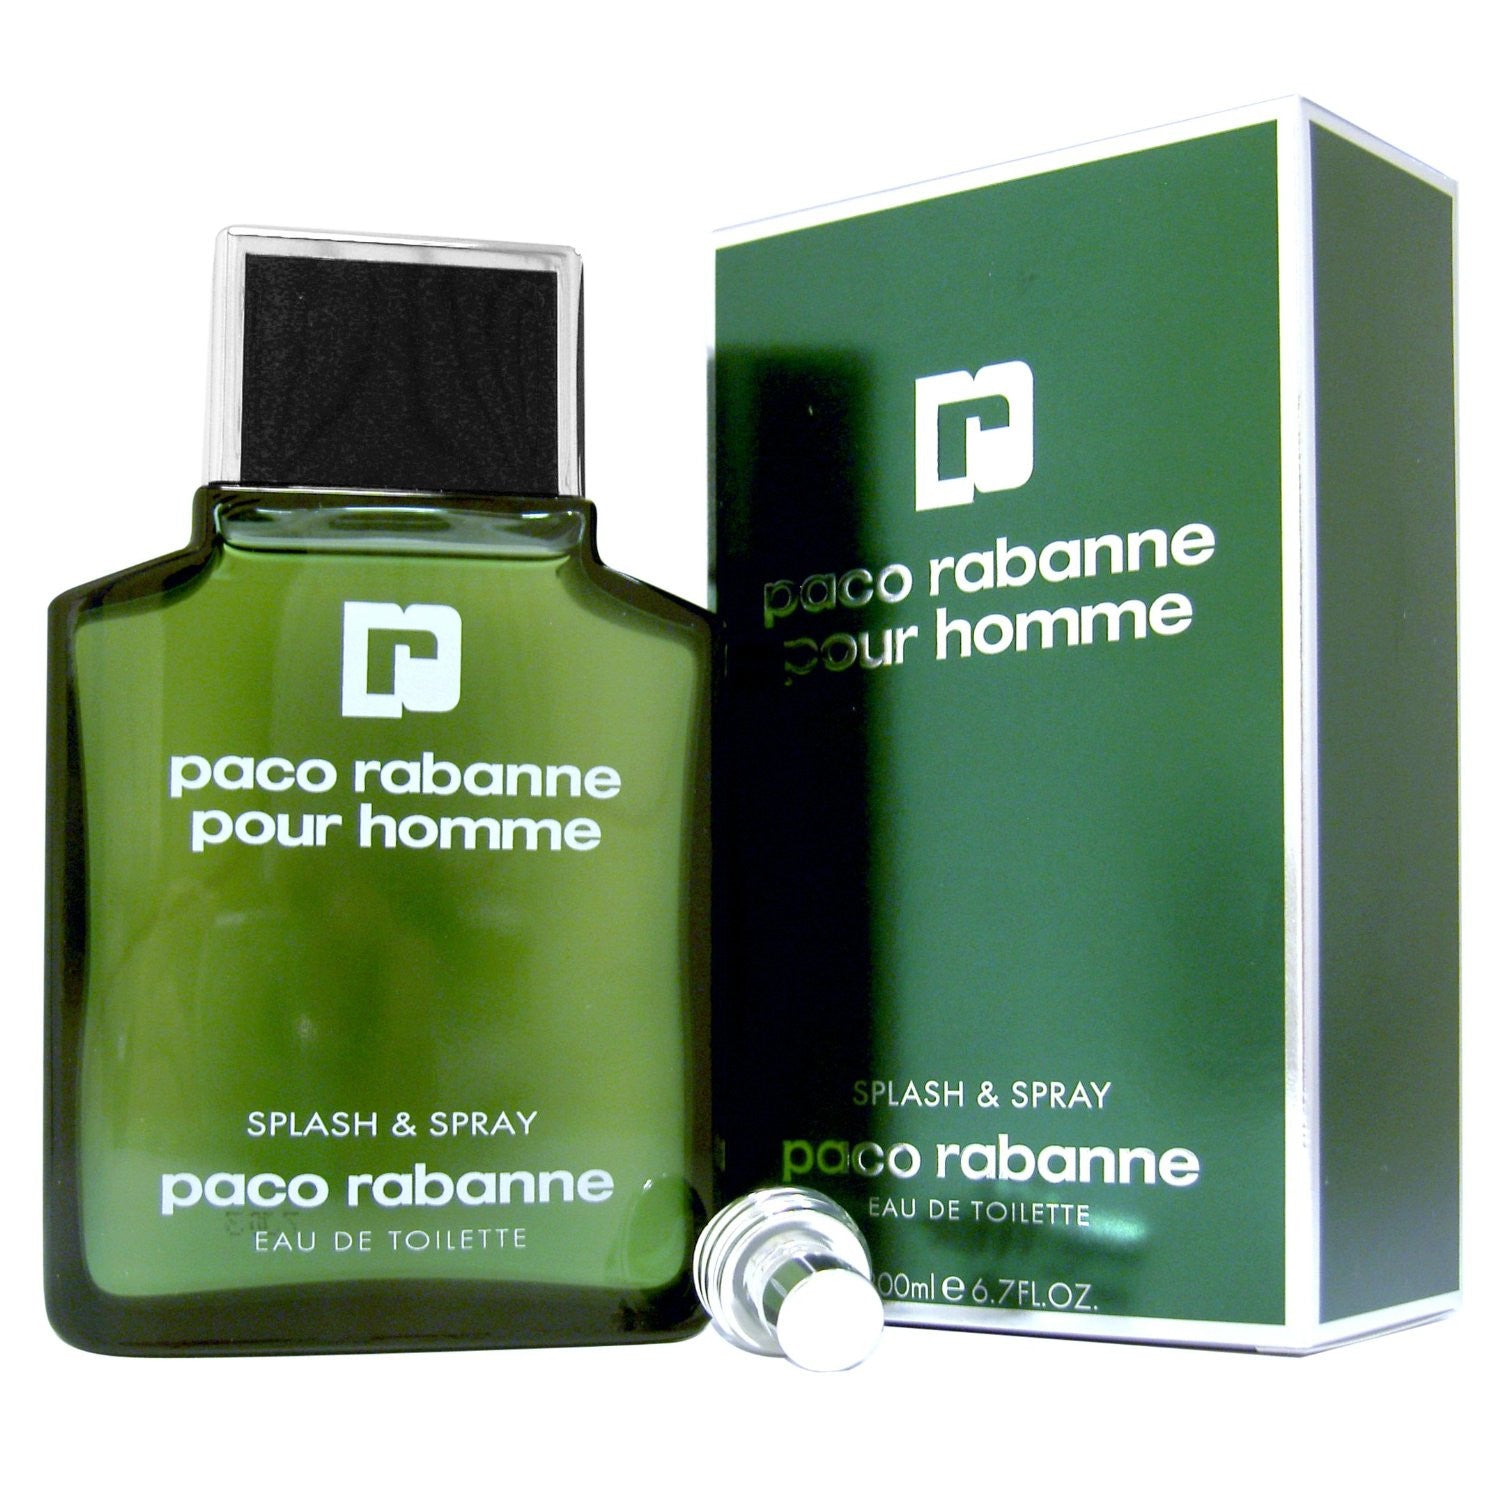 Homme paco. Paco Rabanne мужские pour Home. Пако Рабан мужские 200 мл. Paco Rabanne Paco Rabanne pour homme 200 мл. Мужские духи Пако Рабан зеленая.